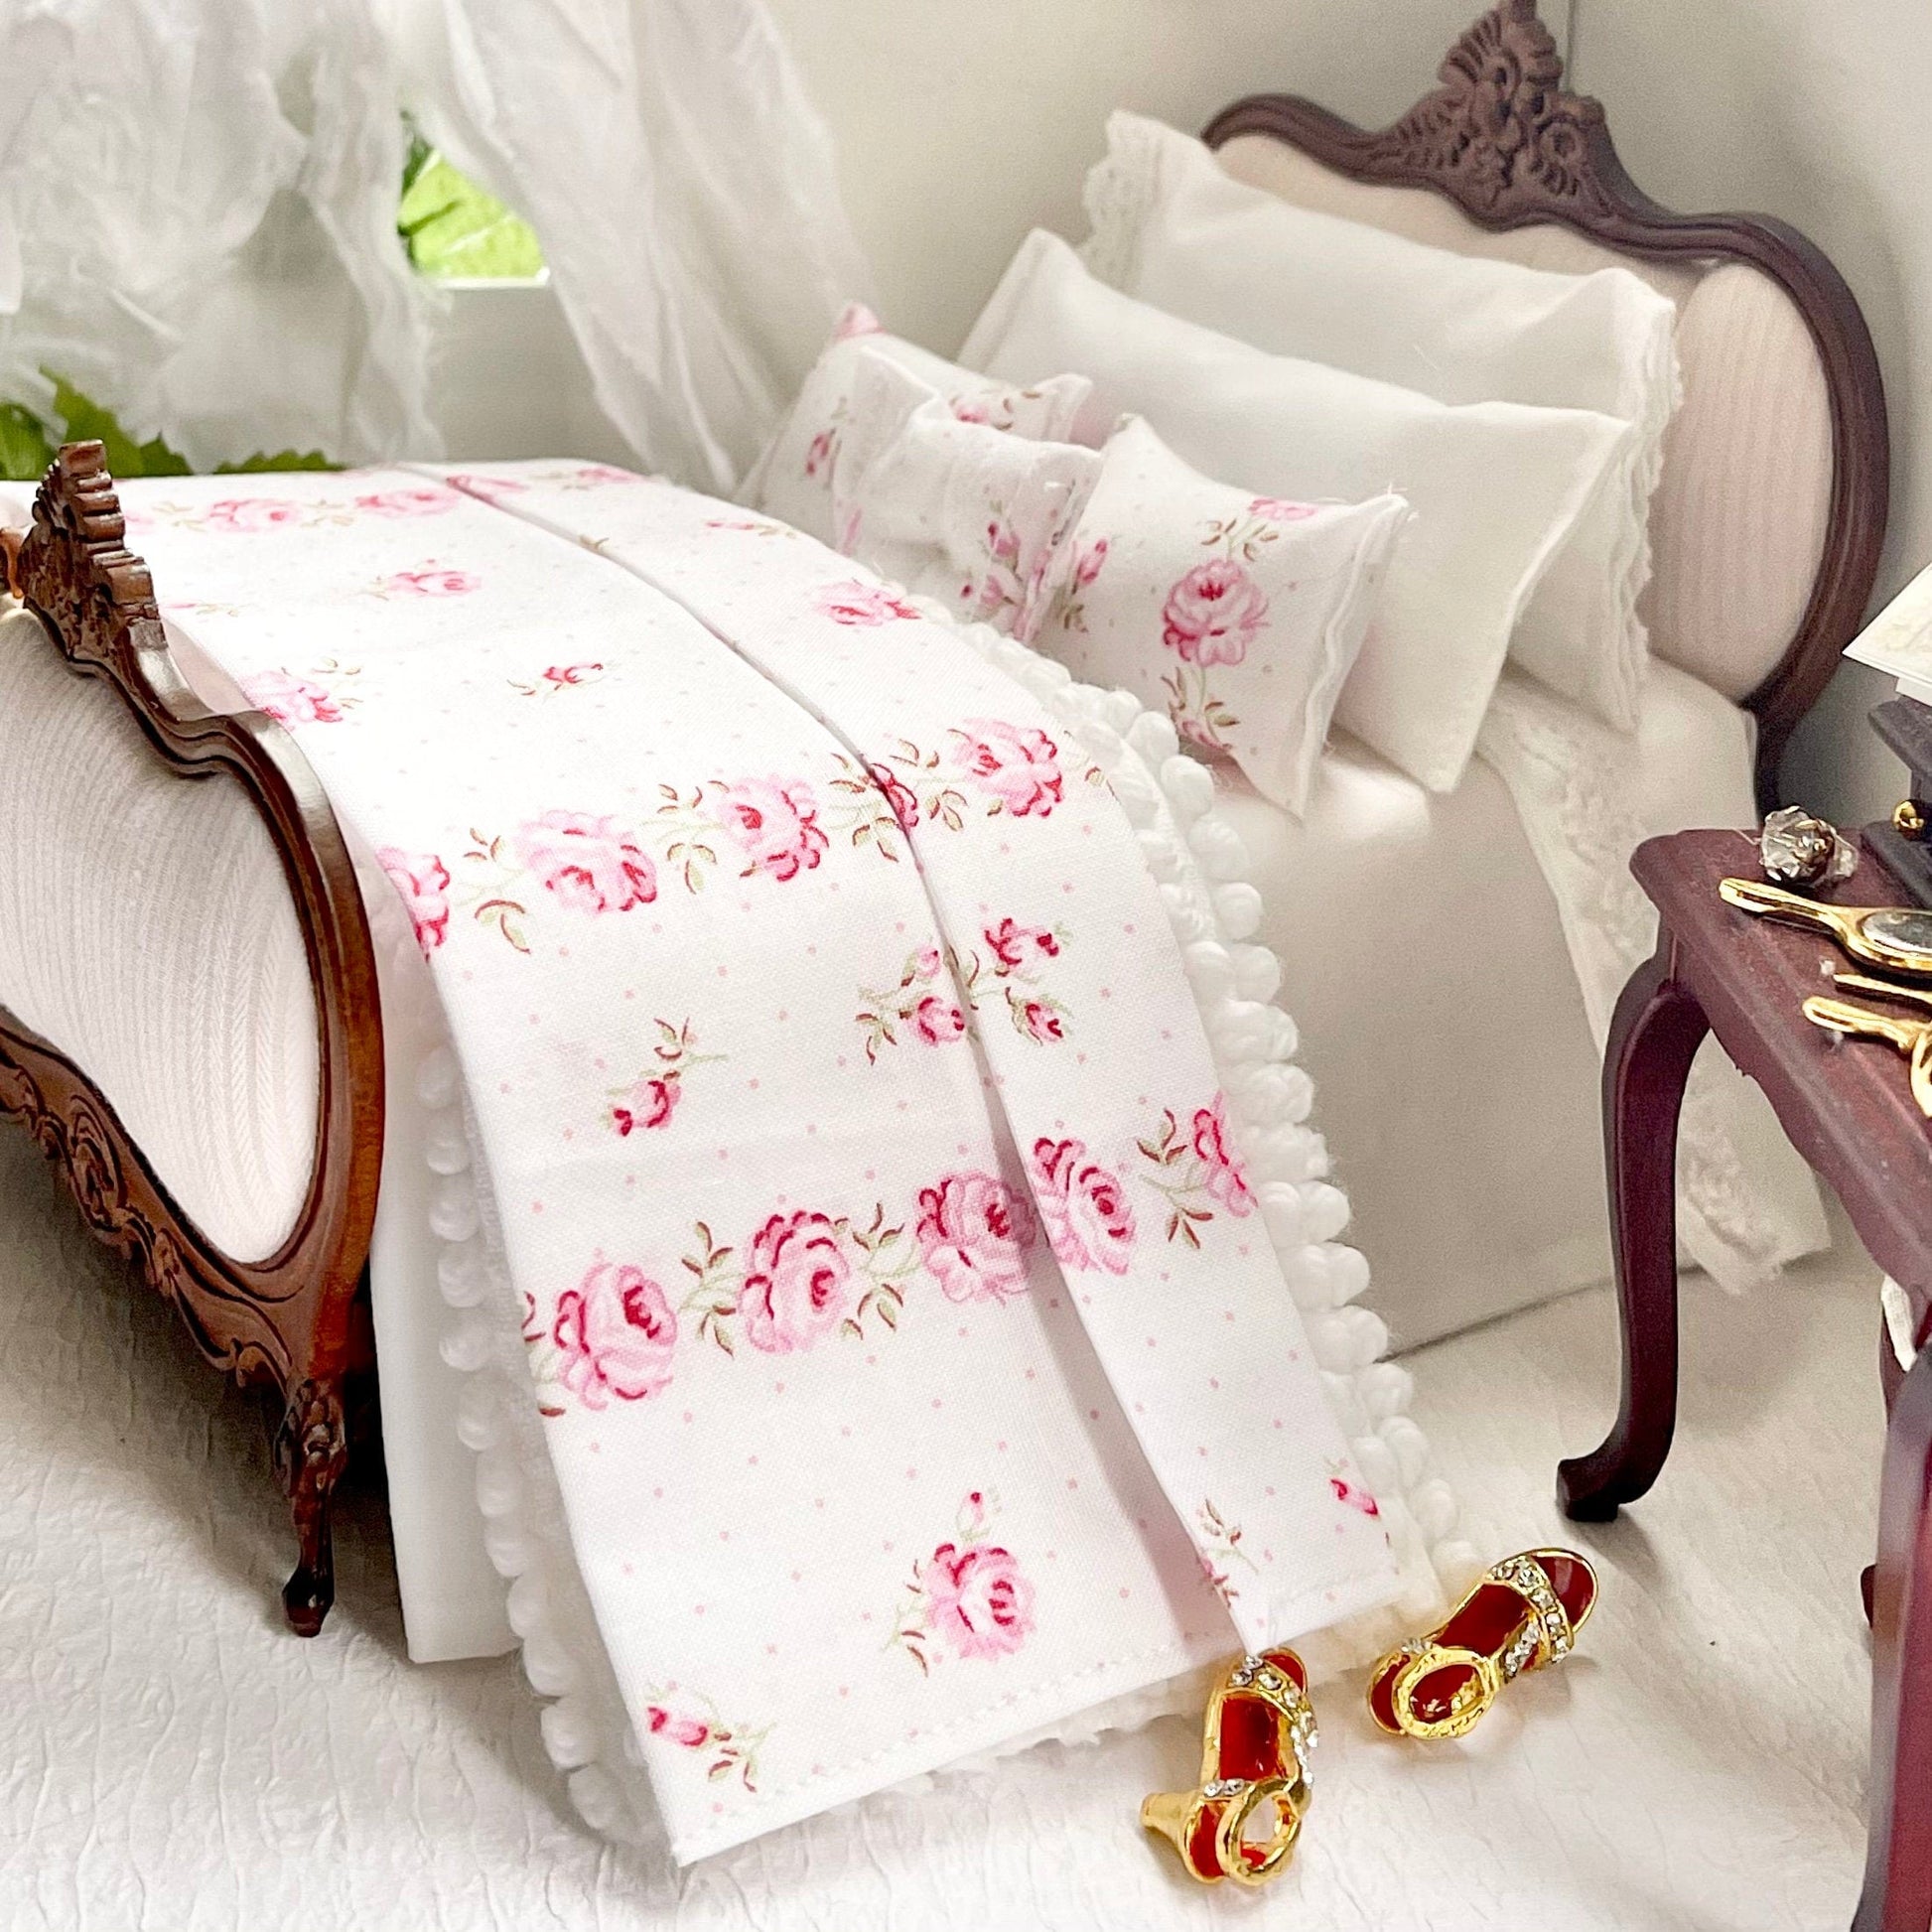 Chantallena Doll House Shabby Cottage - Eight Piece Shabby White Cotton Bedding Set with Pink Rose Trellis Bed Runner